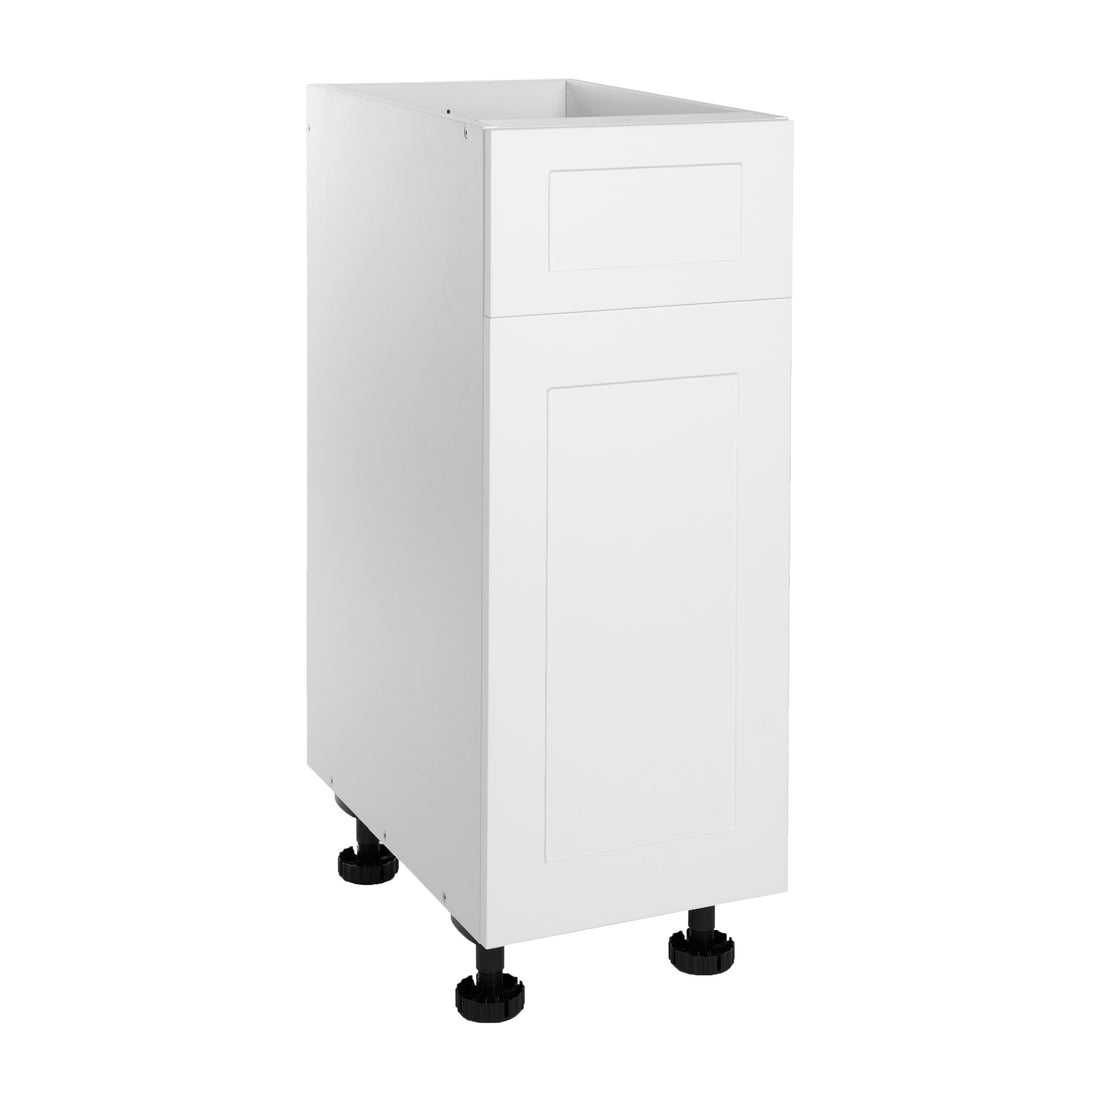 Quick Assemble Modern Style with Soft Close, White Shaker Base Kitchen Cabinet 1 Drawer (12 in W x 24 in D x 34.50 in H) -  Pro-Edge HD